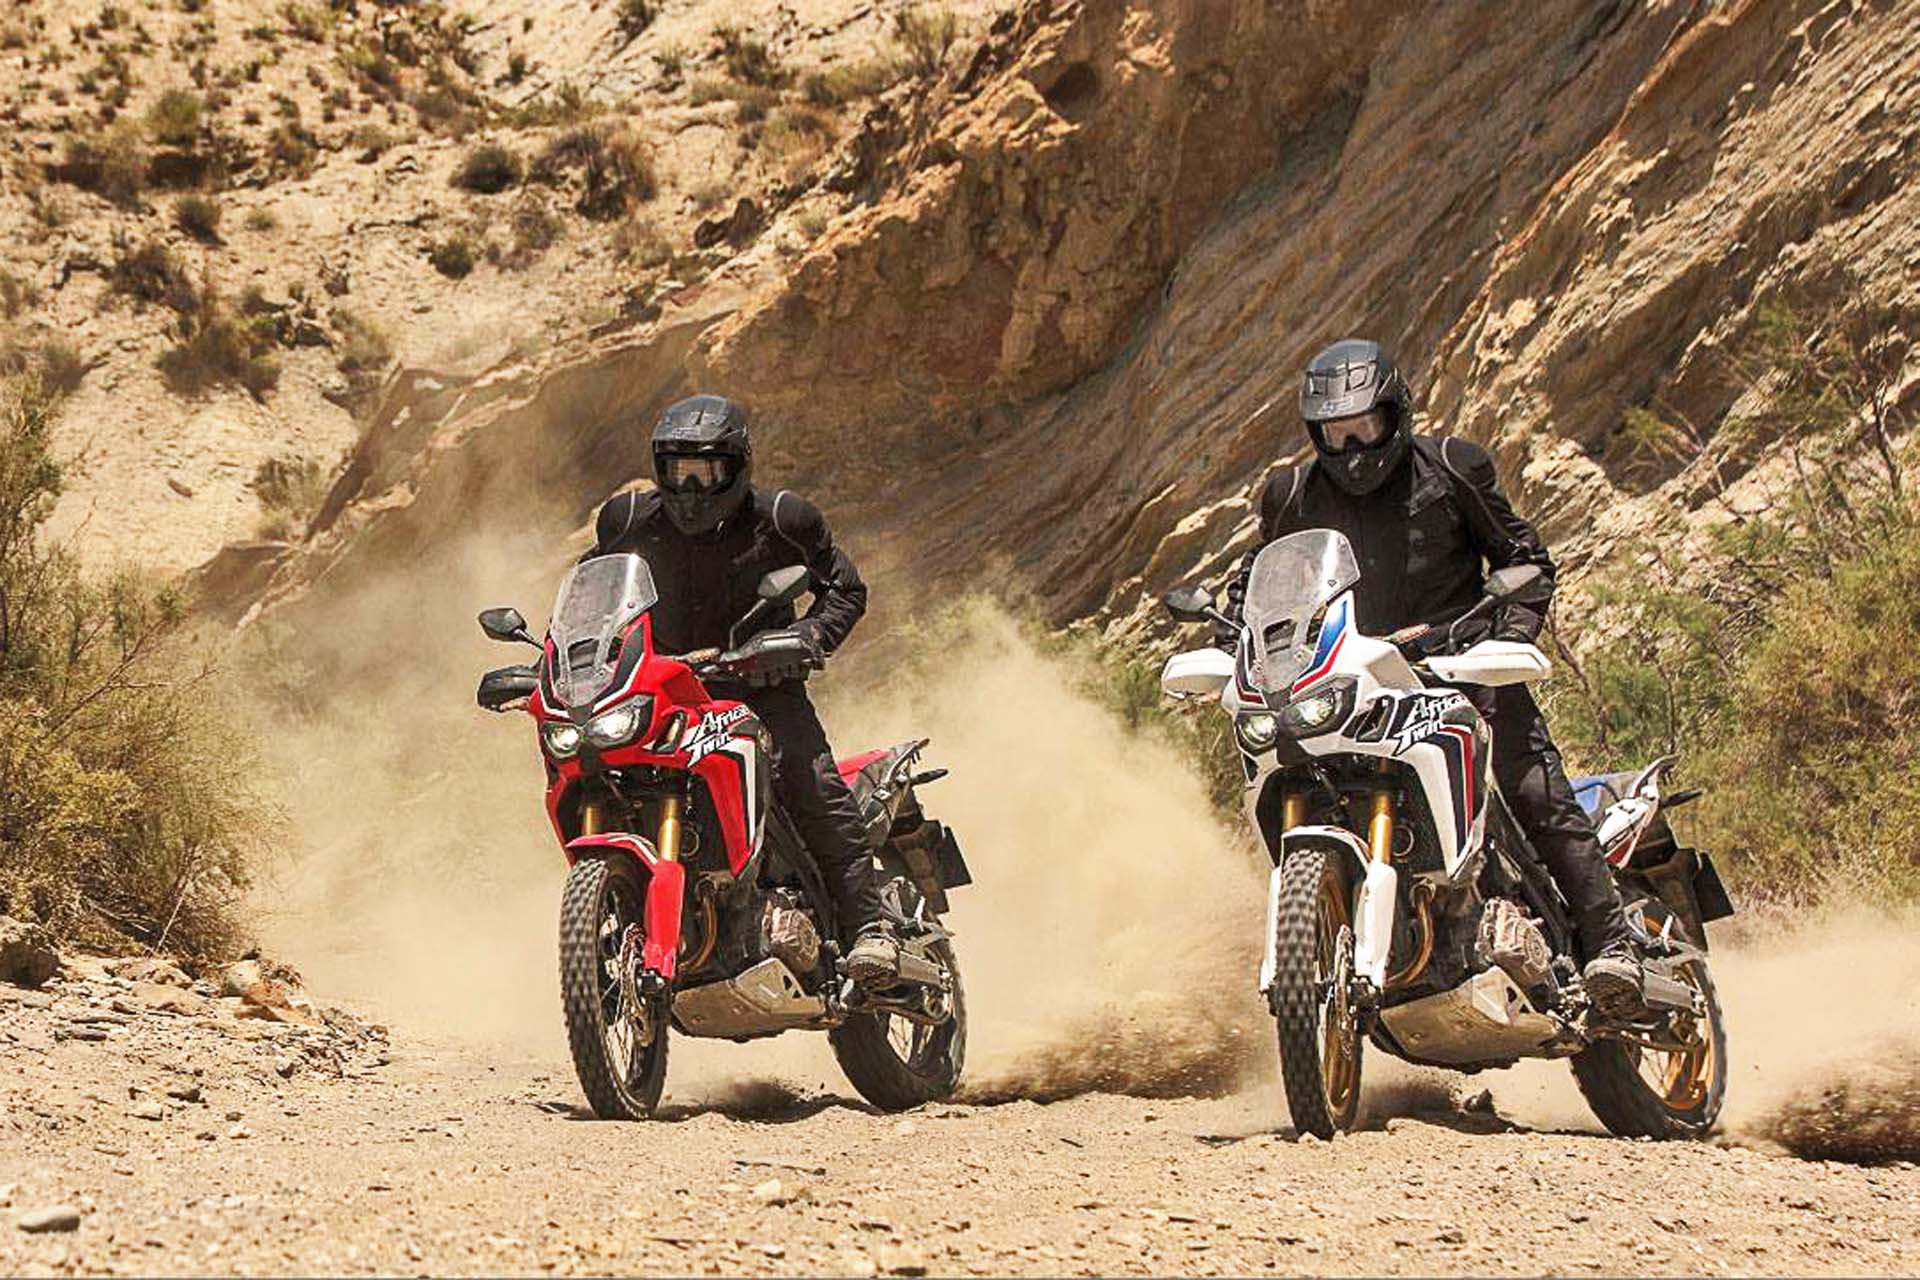 Honda’s ultra-serious adventure bike comes with either a manual or dual-clutch automatic transmission and a 998cc SOHC parallel twin engine. The 9.1 inches of front suspension and travel and 8.7 inches in the back, plus aluminum skid plate, compact battery/engine/oil placement and rubber-mounted handlebar mean the Africa Twin will be a heavy-duty off-road brawler.